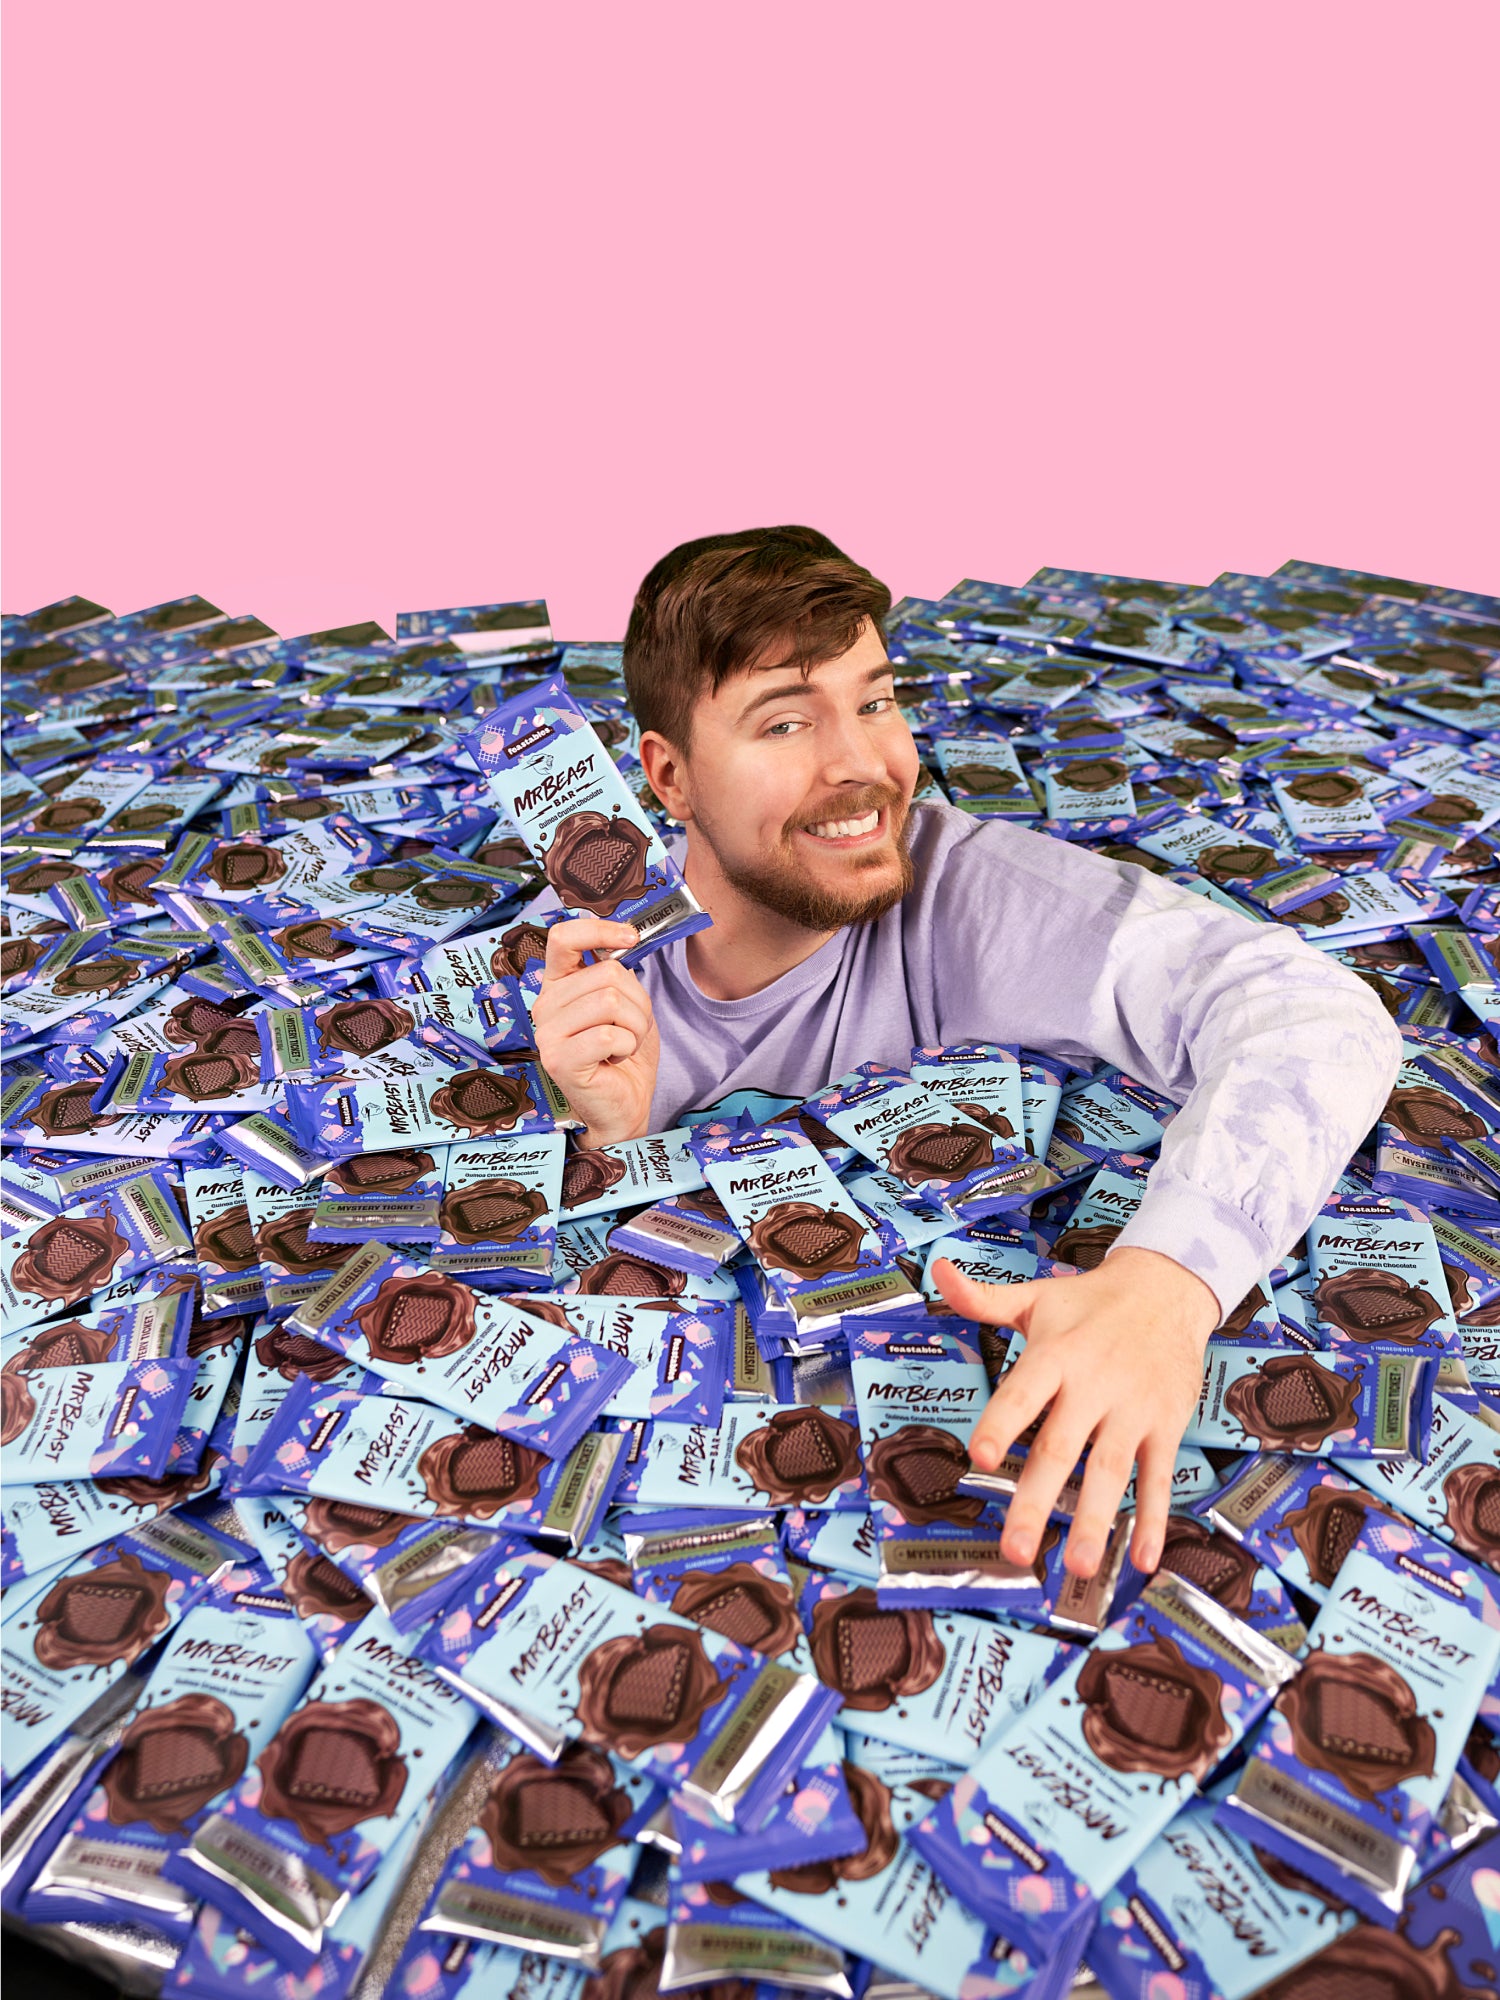 MrBeast surrounded by several Feastables chocolate bars with blue packaging. In the background is a pink backdrop.